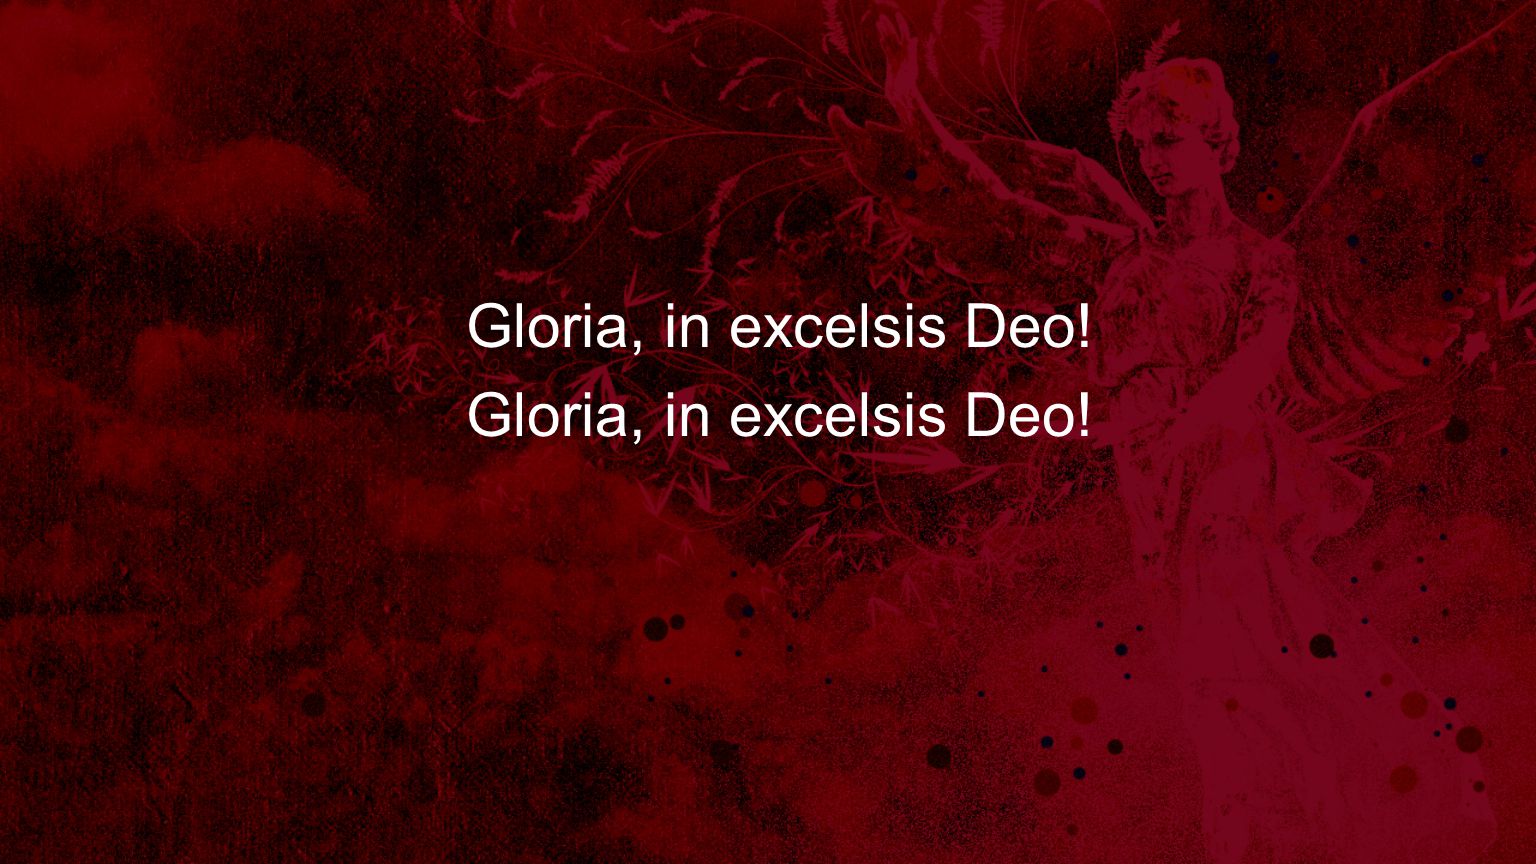 Gloria, in excelsis Deo!